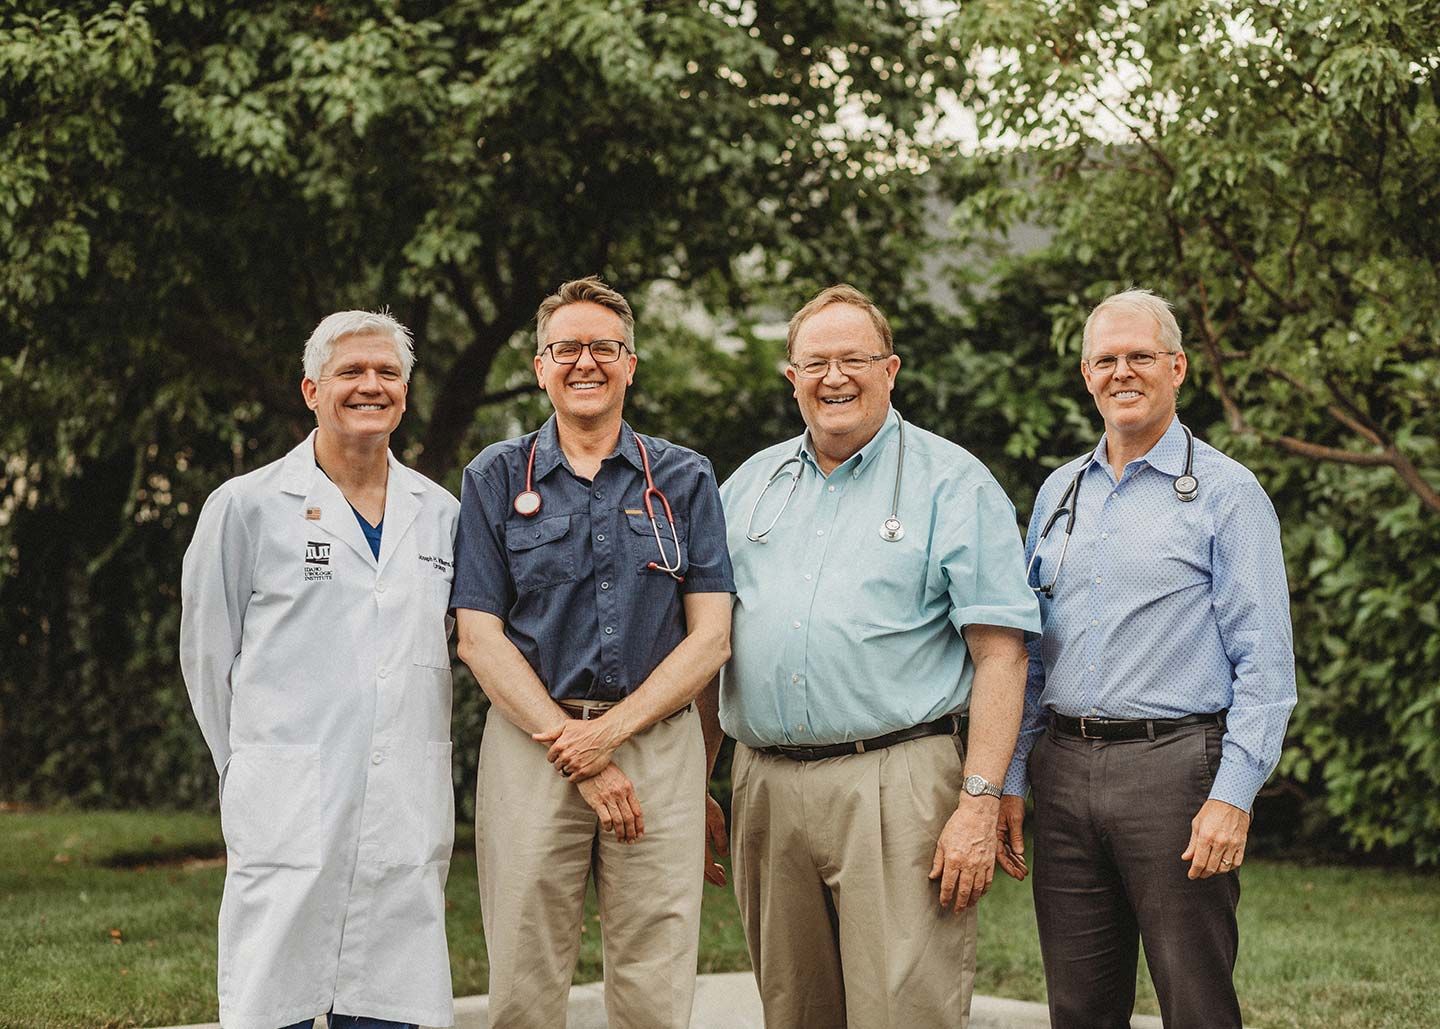 IDID Founders from Left to Right: Dr. Williams, Dr. Owsley, Dr. Hessing, Dr. Gee